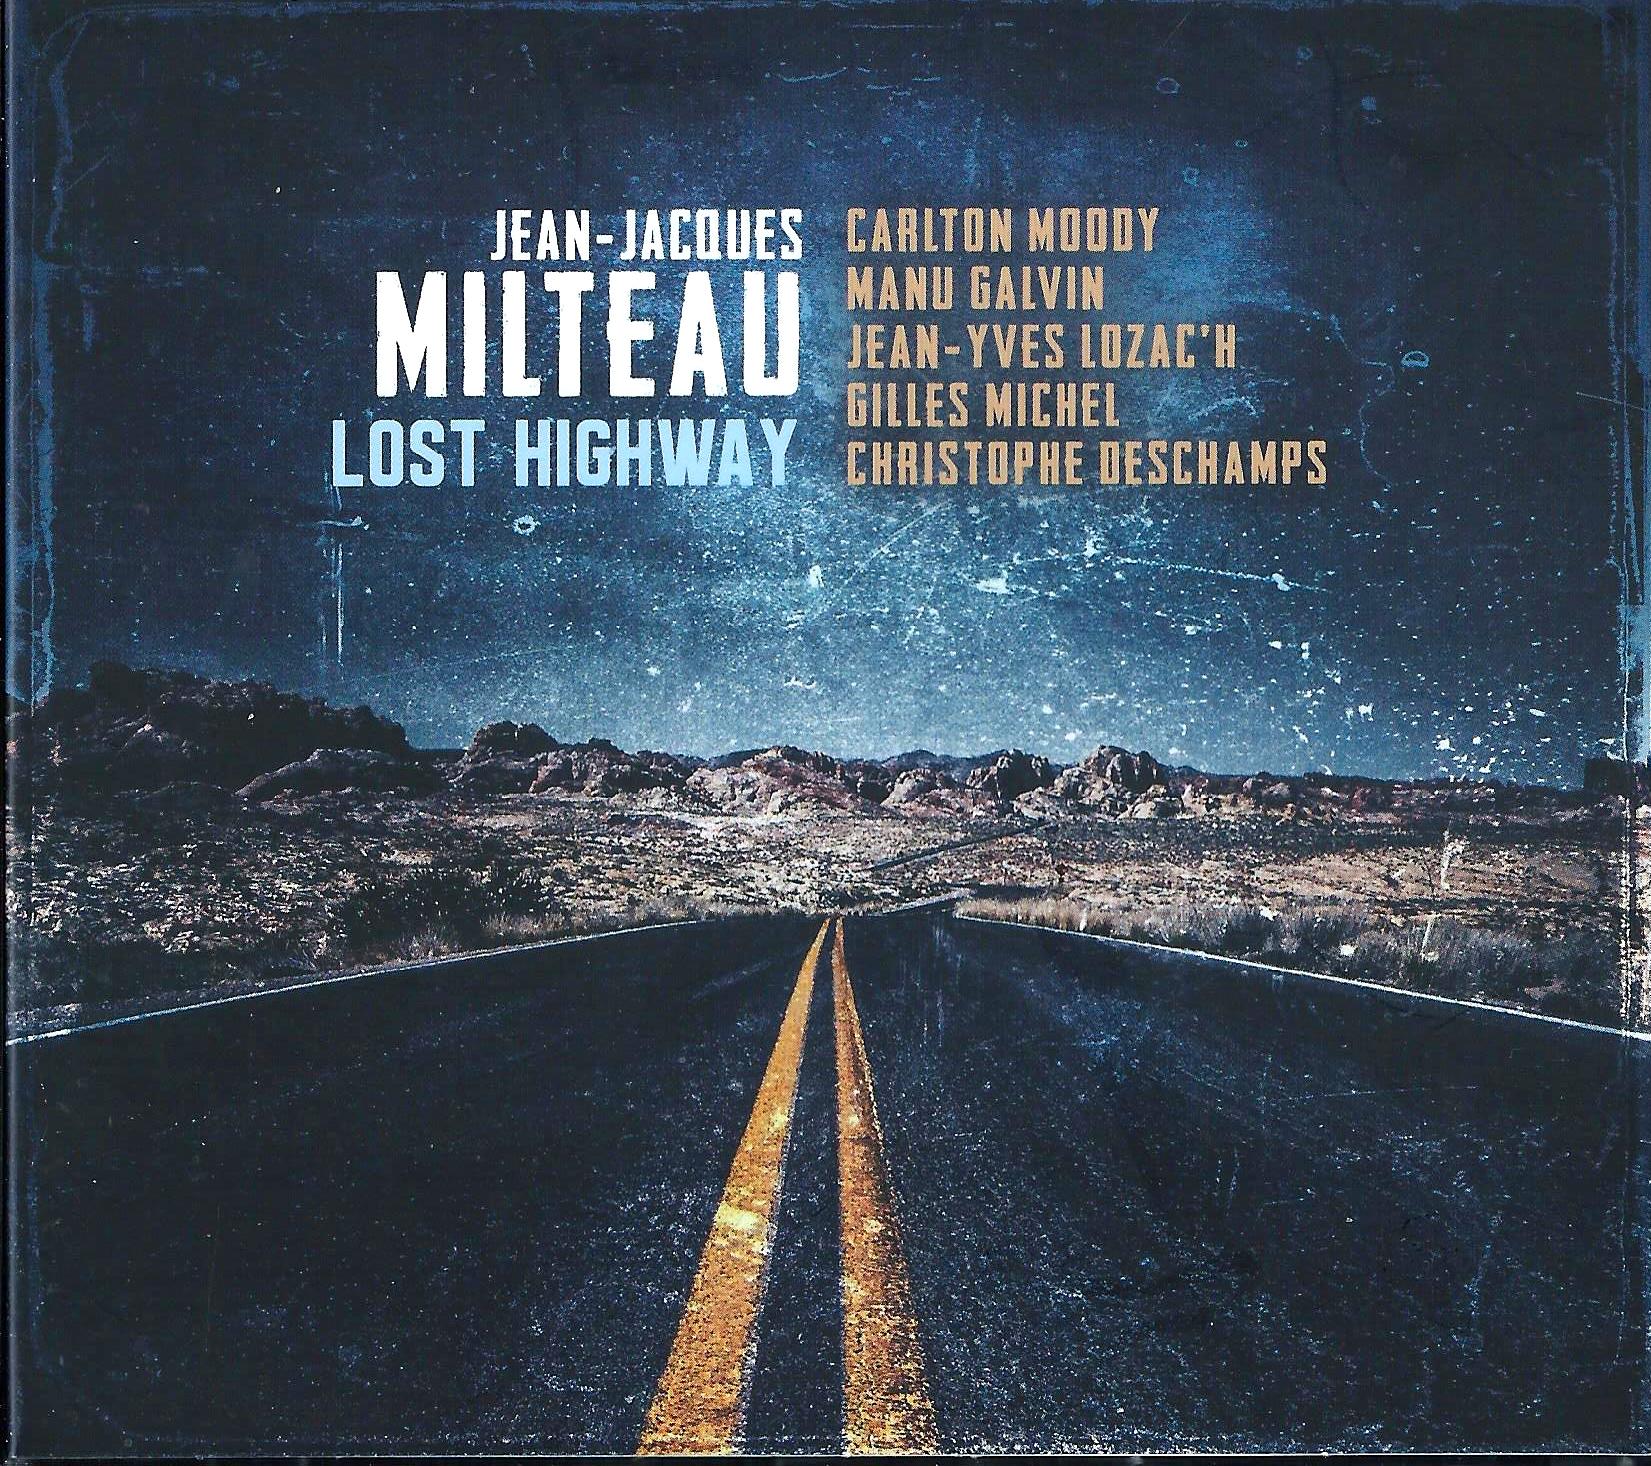 JEAN-JACQUES MILTEAU - Lost Highway